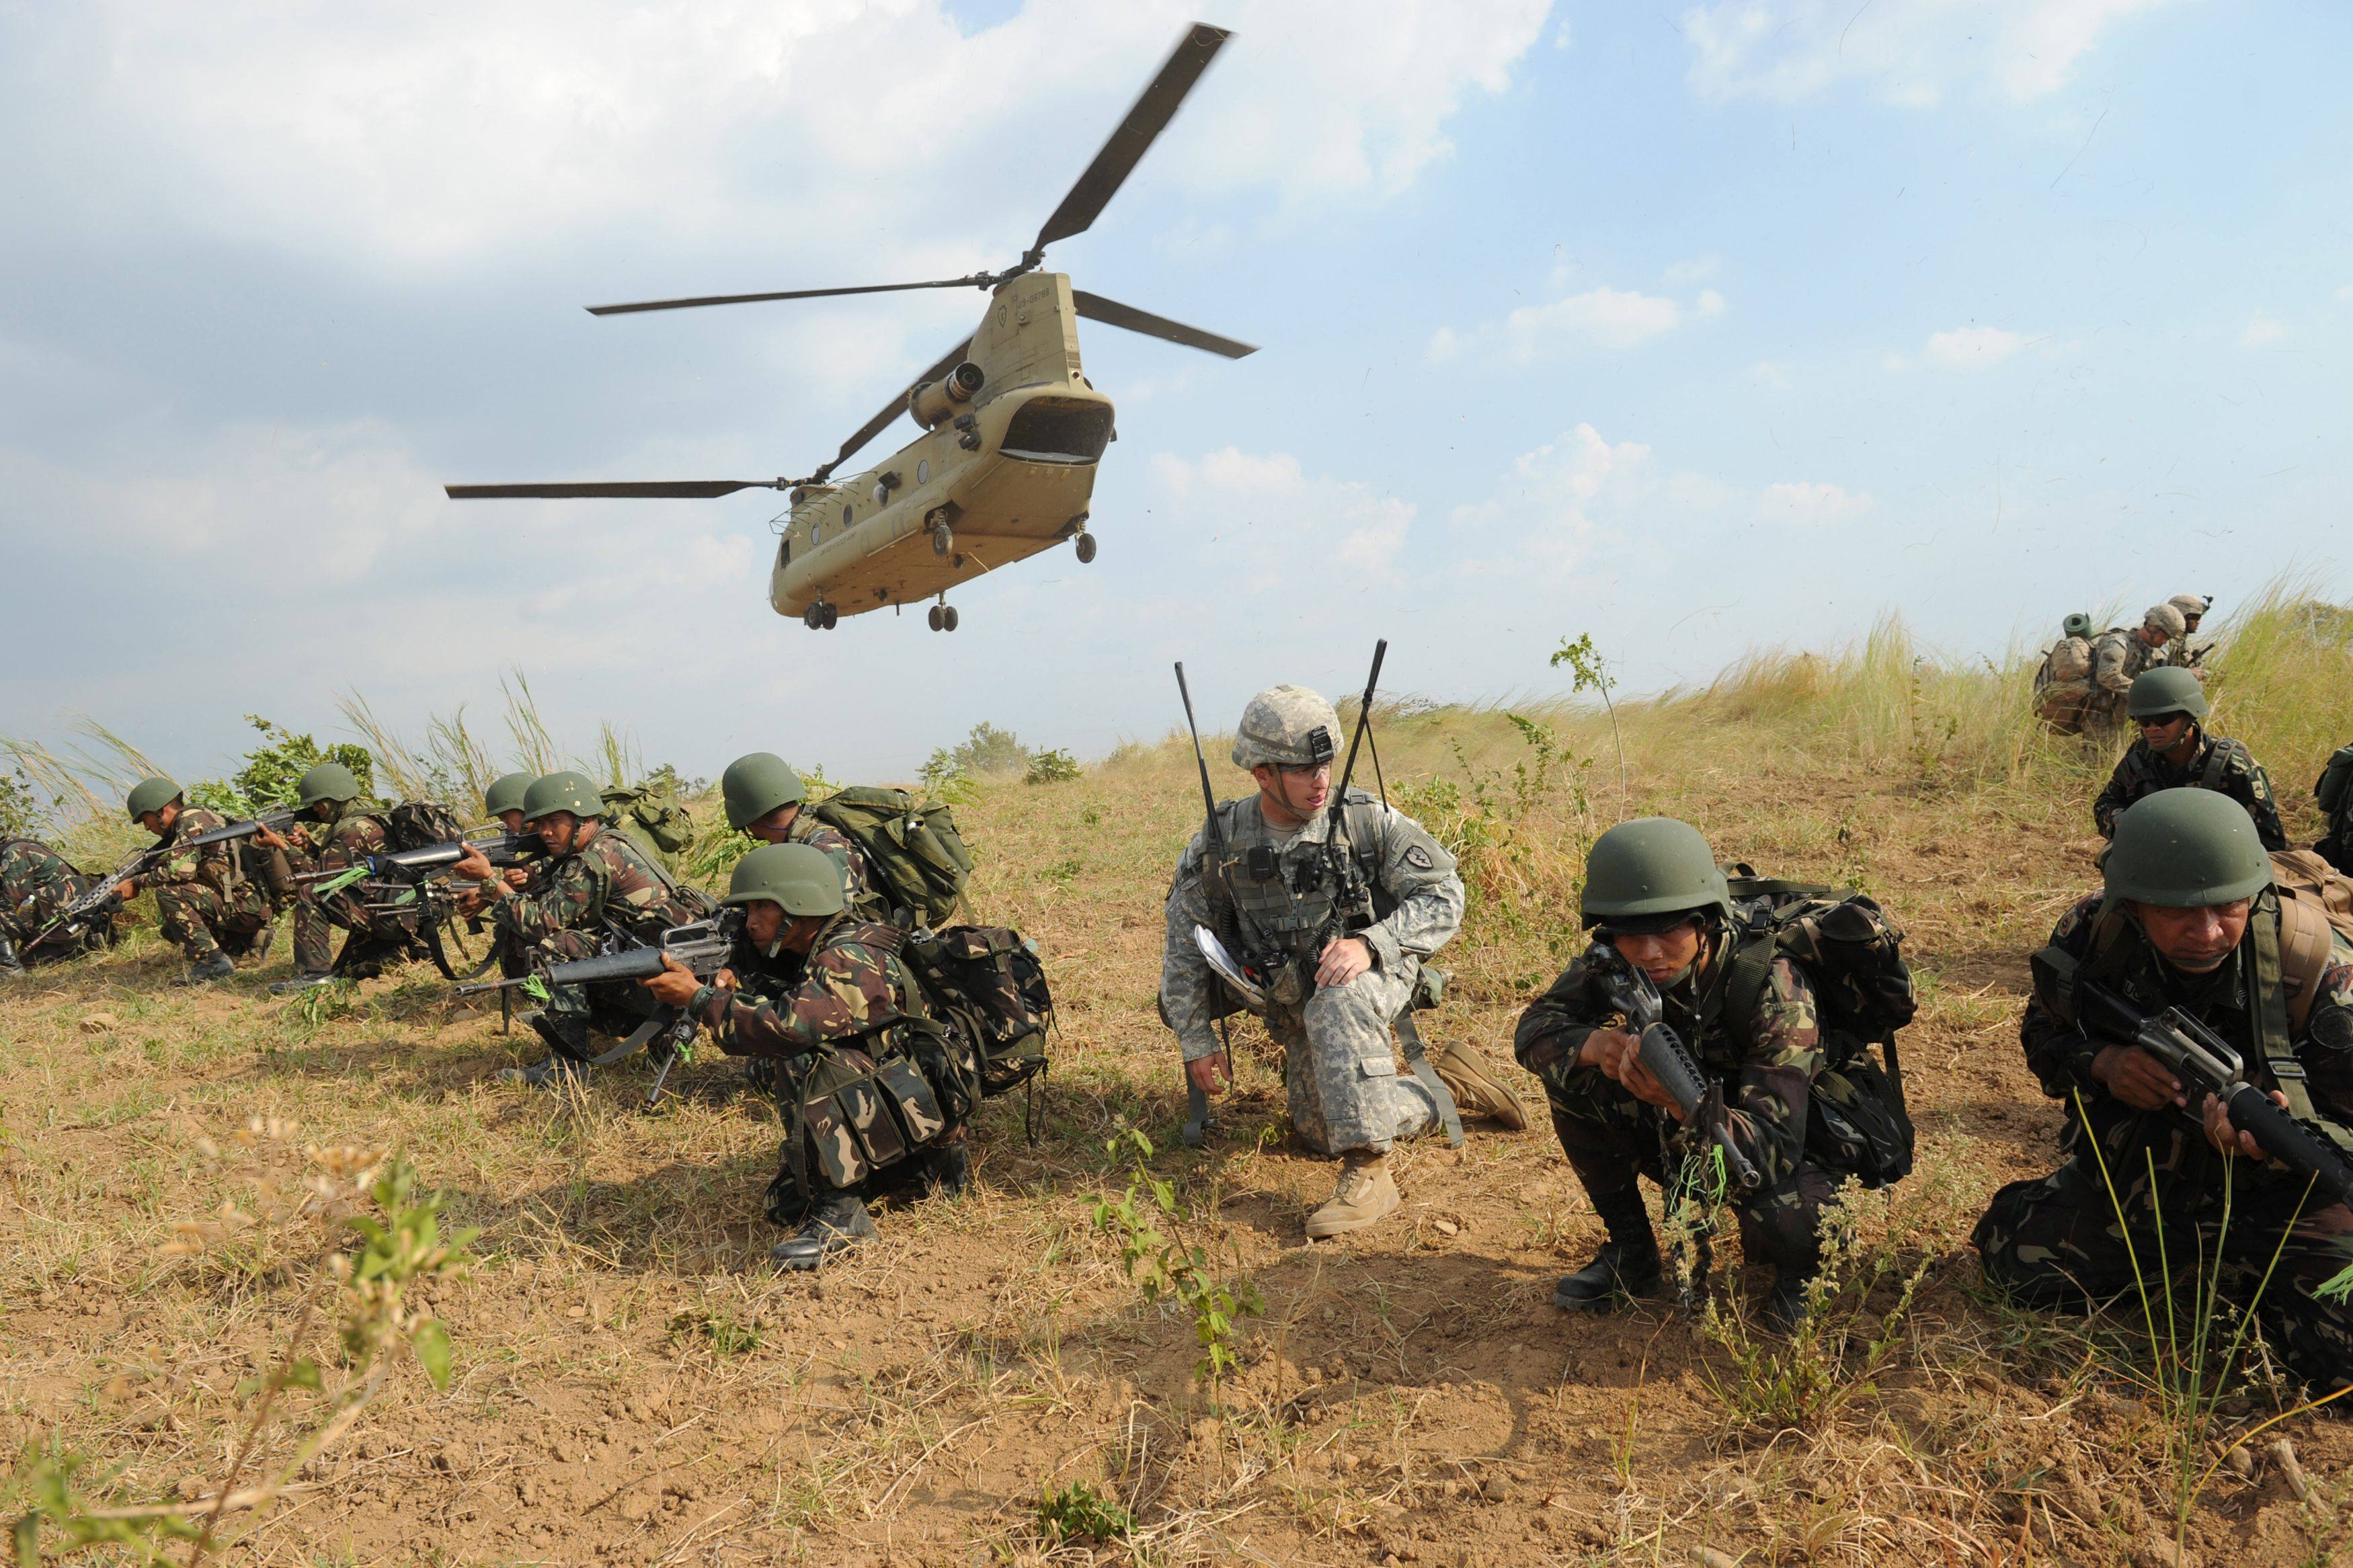 Philippine soldiers and a US soldier take part in an air assault exercise at Fort Magsaysay in Nueva Ecija province, north of Manila, in April 2015. Photo: AFP